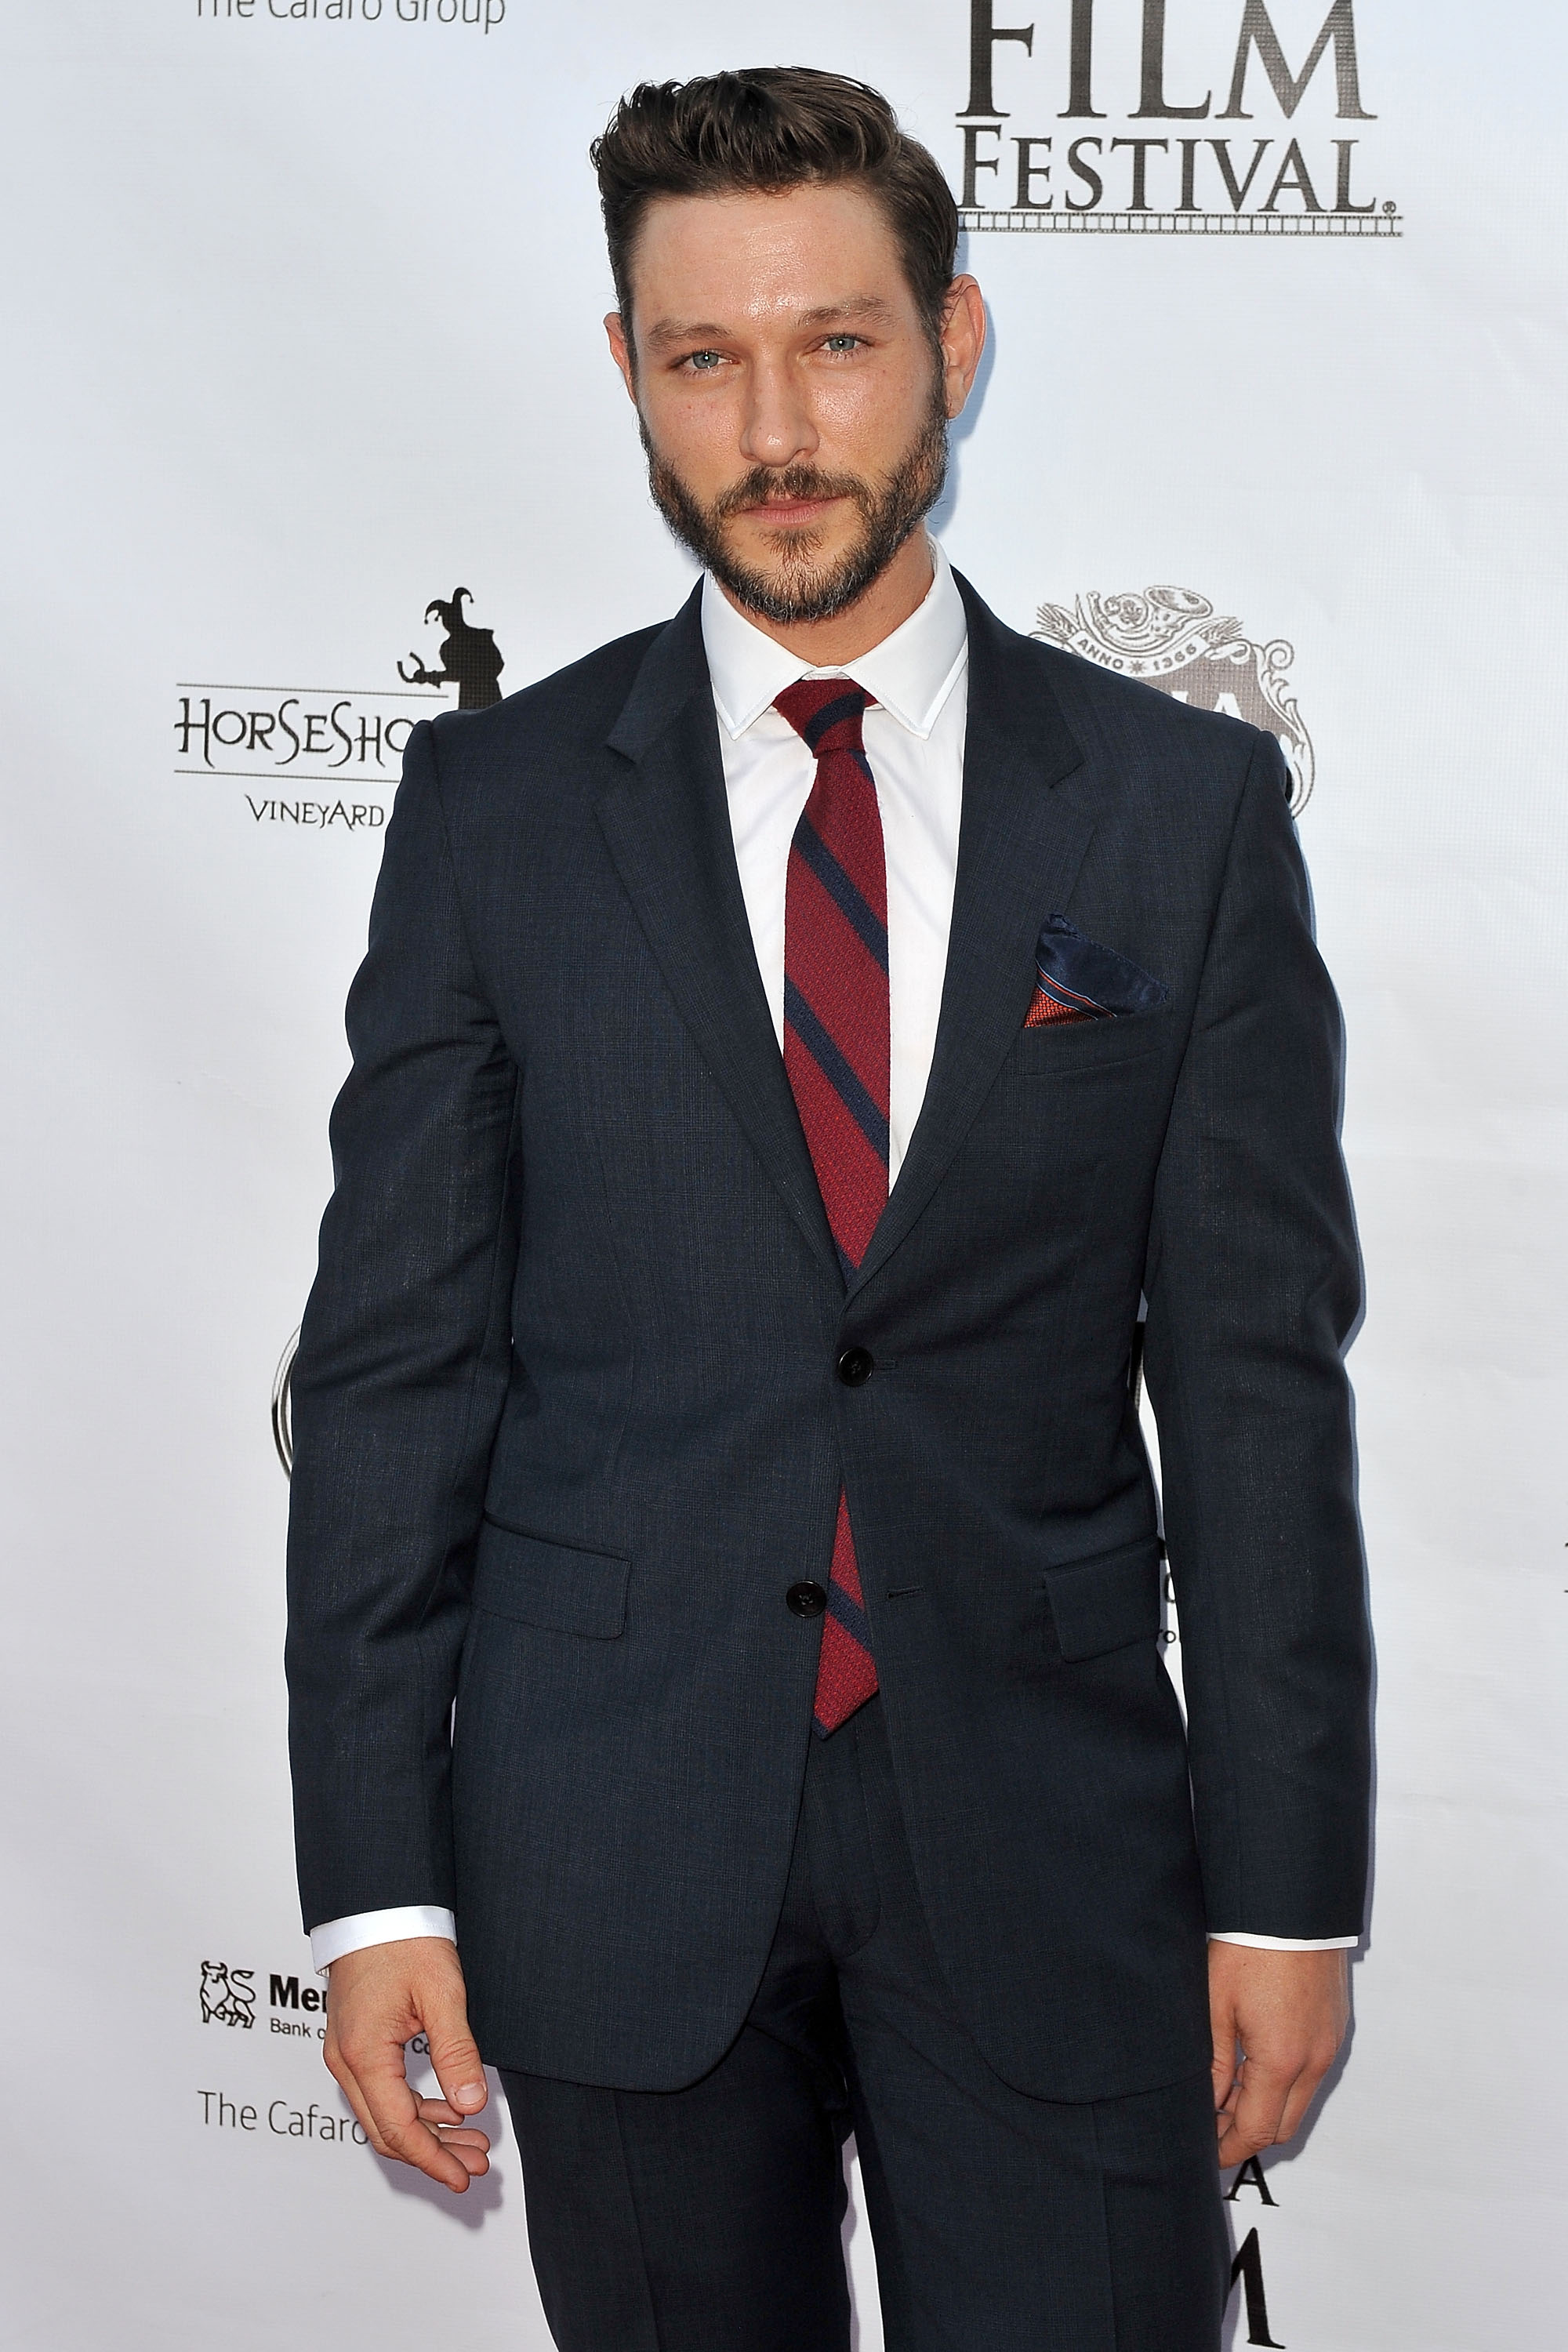 'The Young and the Restless' actor Michael Graziadei dressed in a navy blue suit.